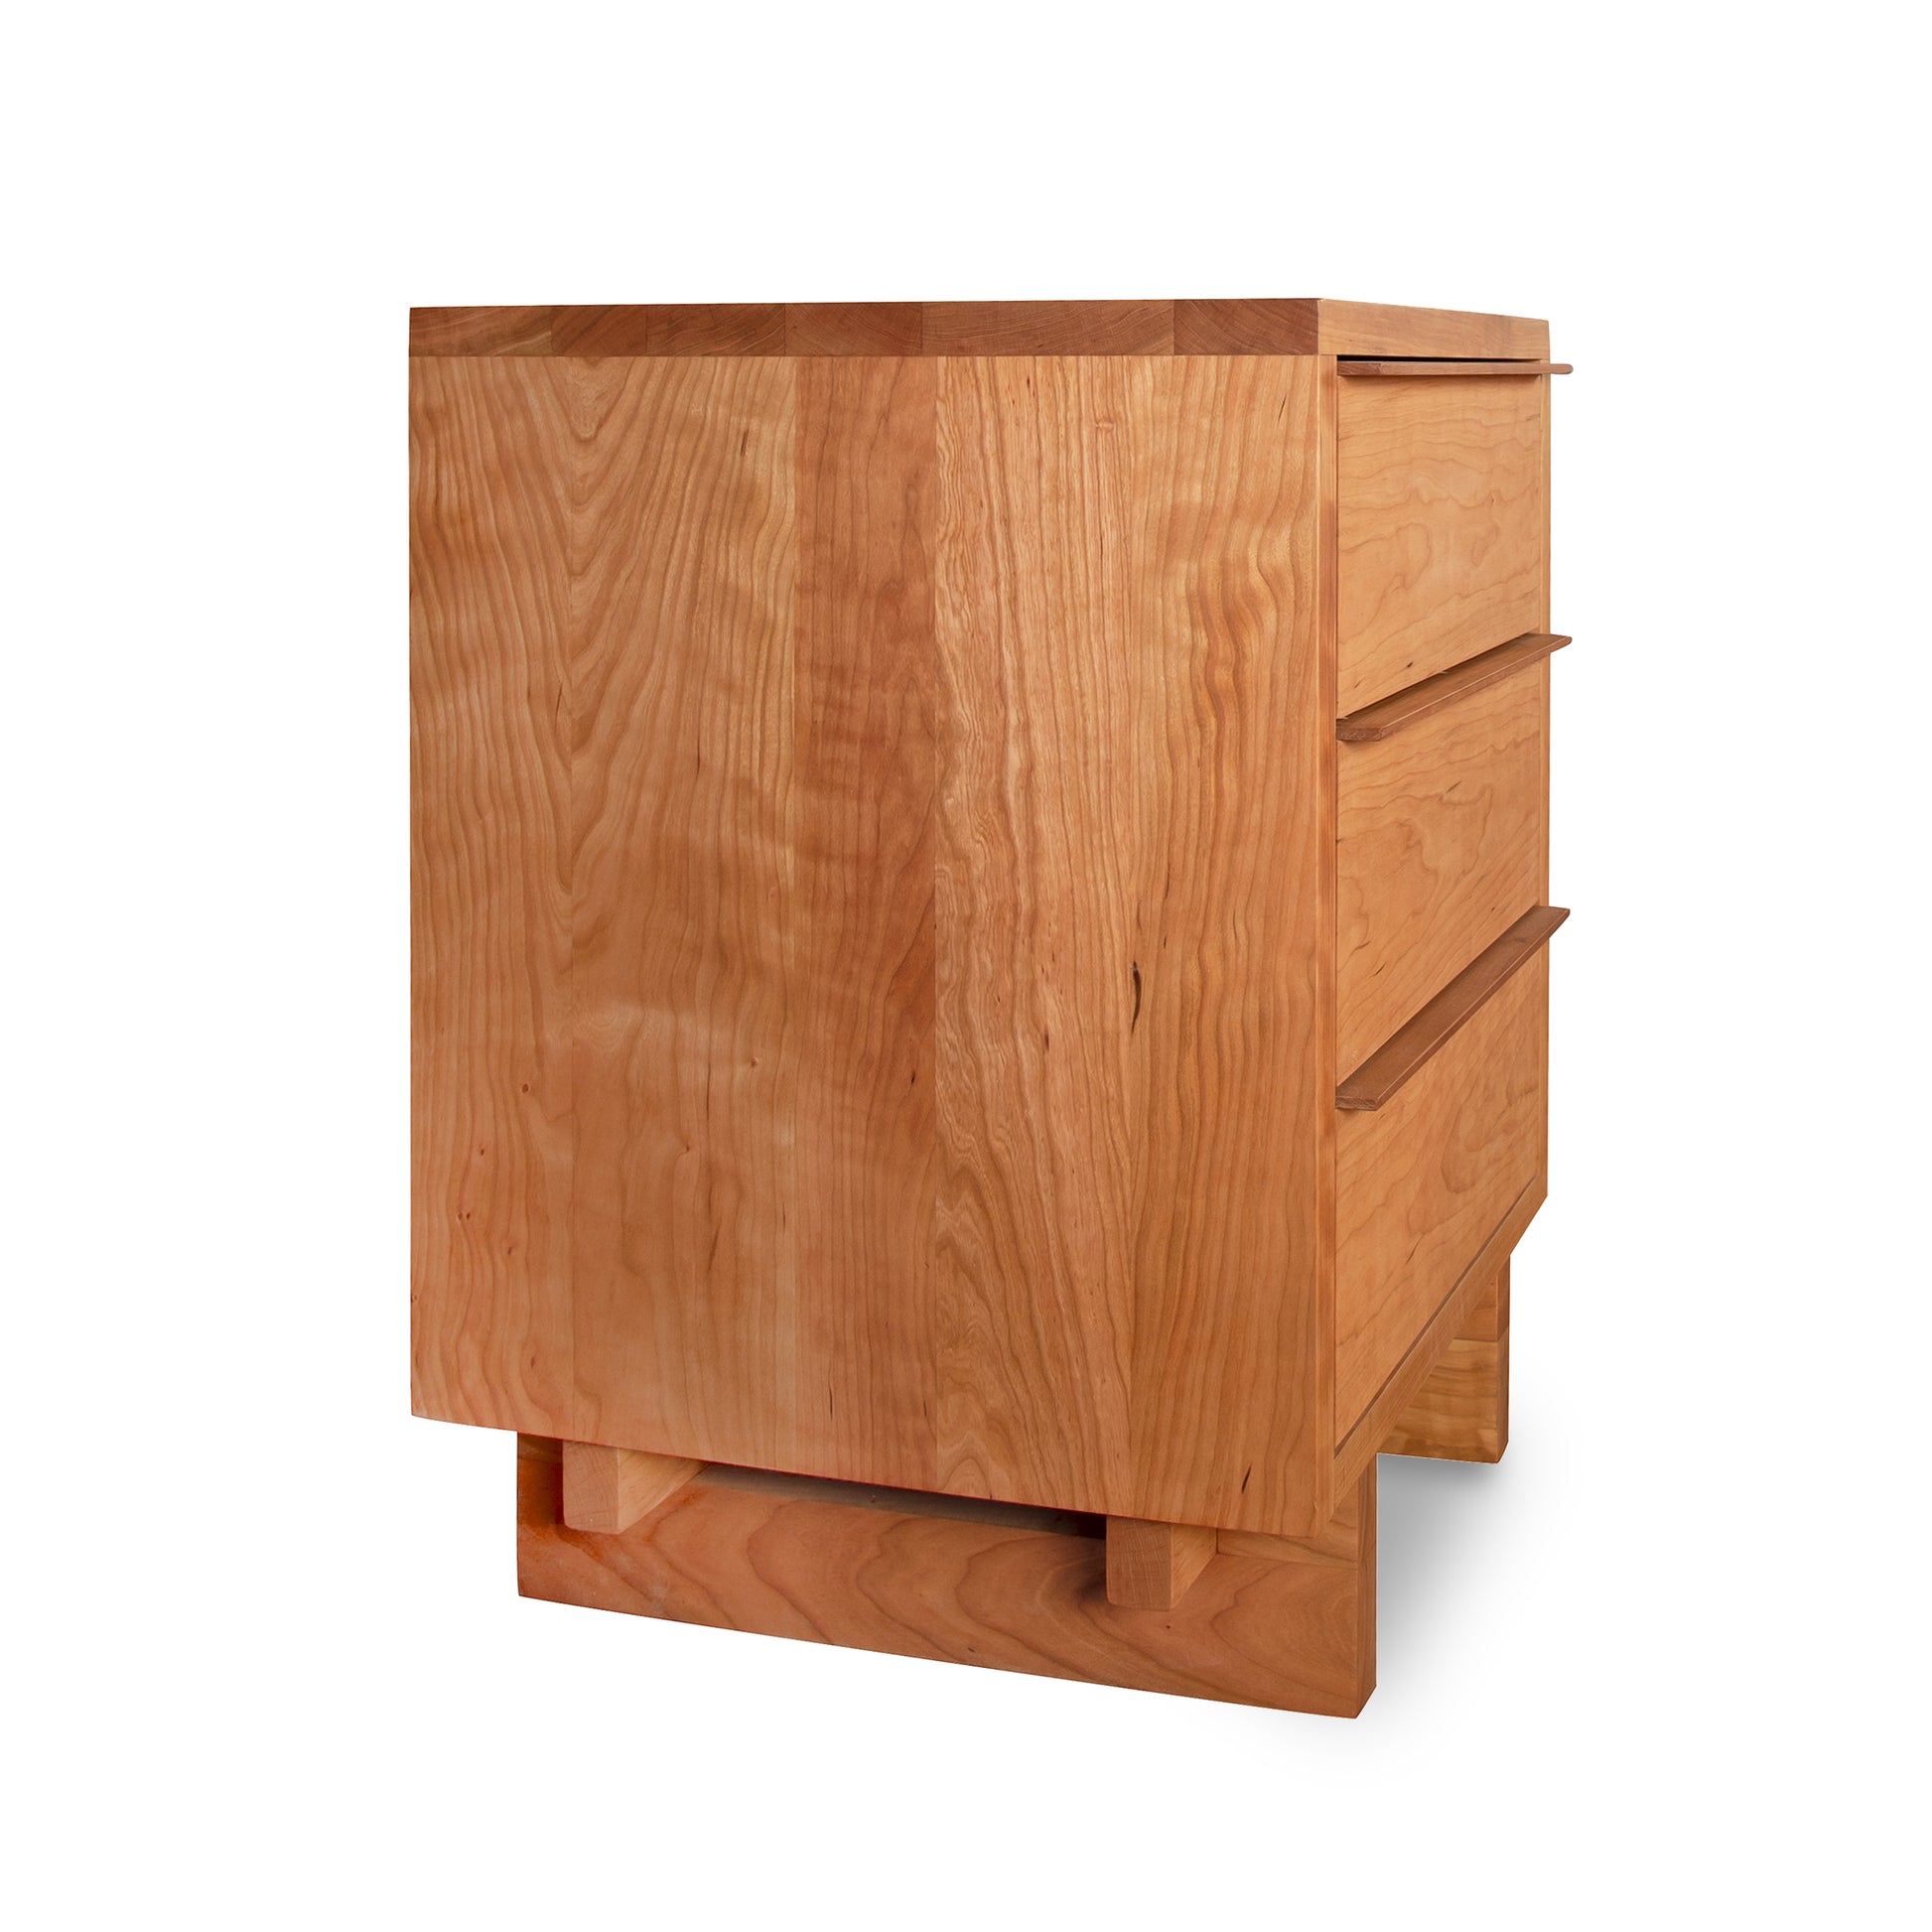 A natural cherry Vermont Furniture Designs Kipling 3-Drawer Nightstand with one drawer partially open, isolated on a white background.